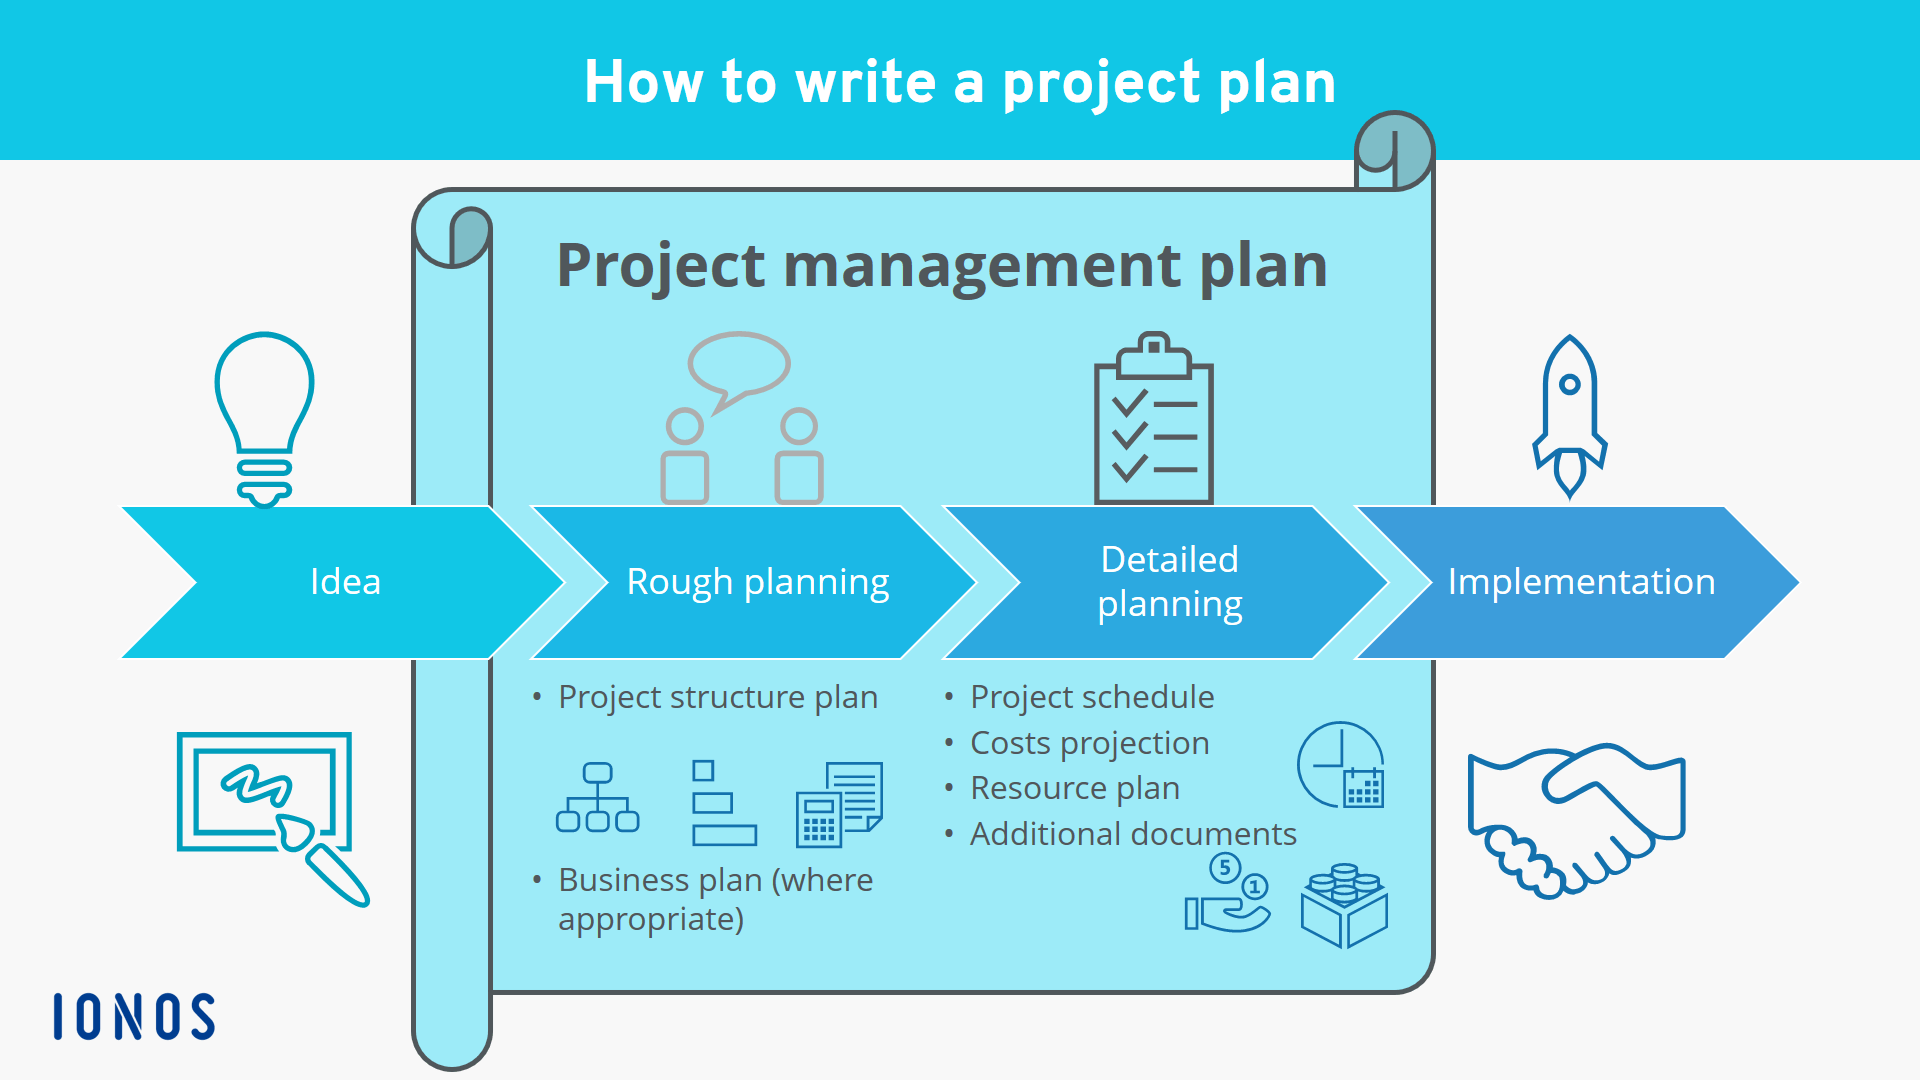 Chart for the question “How do I write a project plan?”